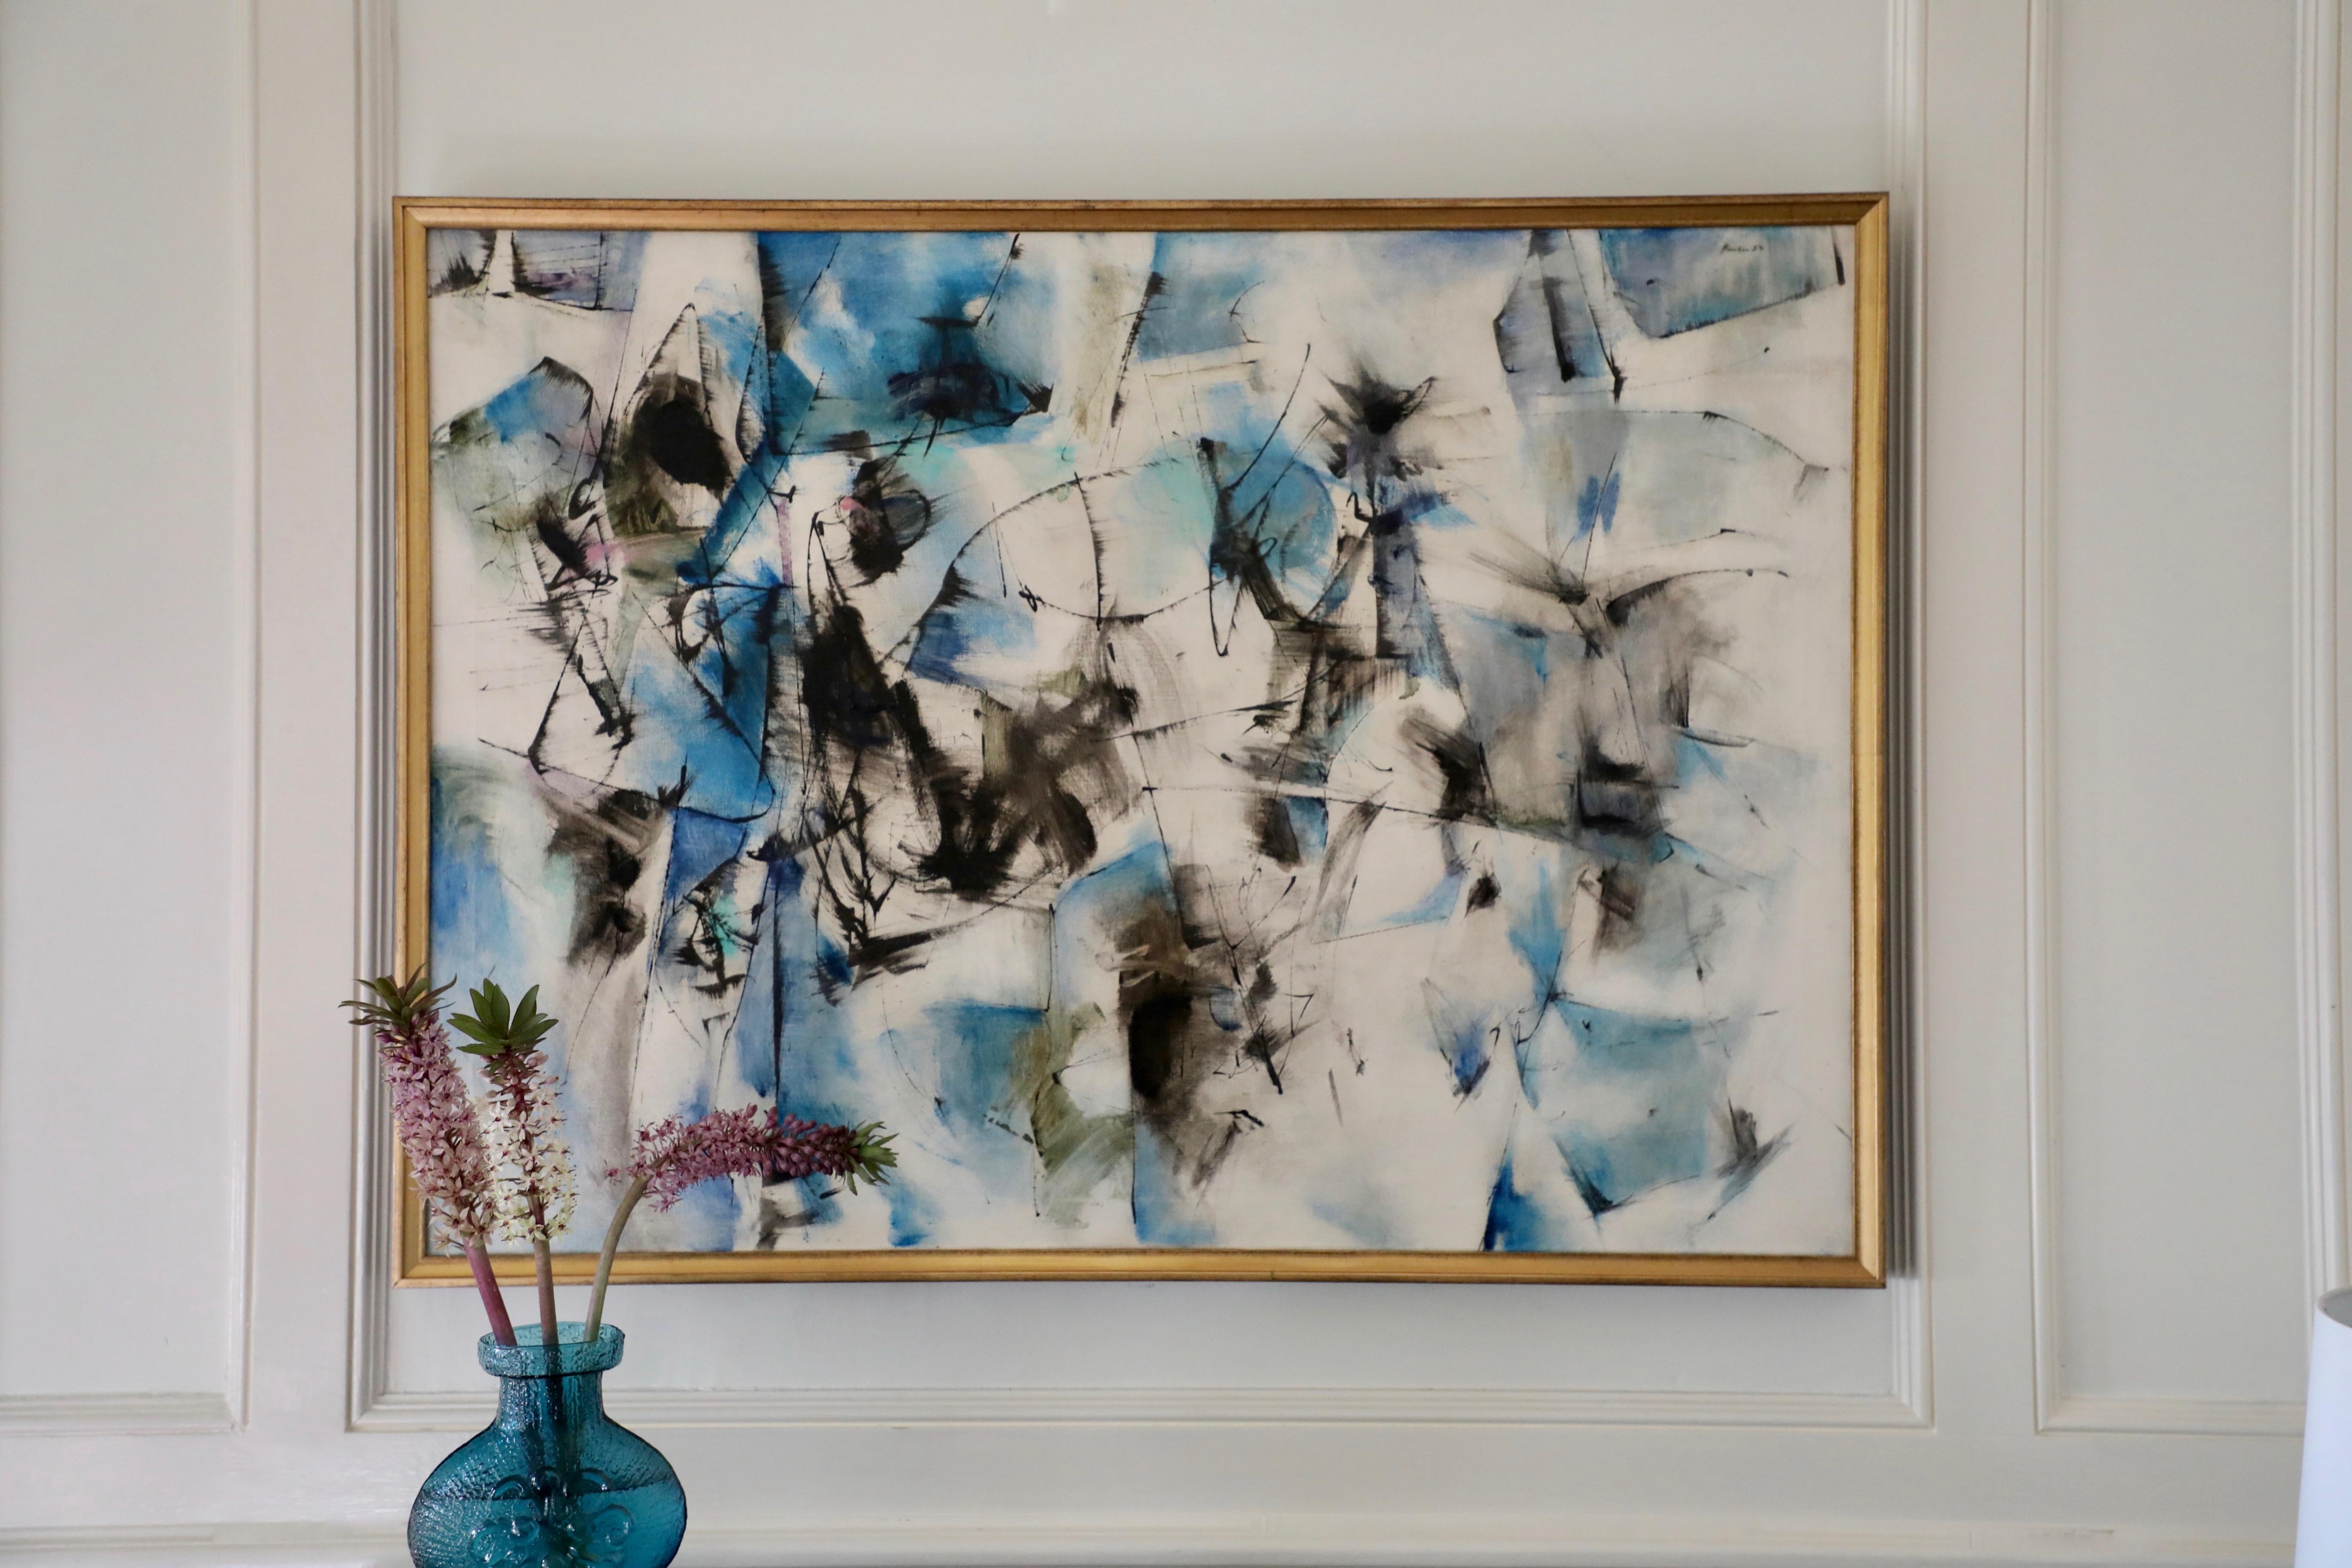 This is a large, excellent example of 1950s abstract expressionism by an acclaimed artist and teacher from the period. This is a great piece to showcase in a dining room or in a living room above a couch.  It is ethereal and other-worldly with a